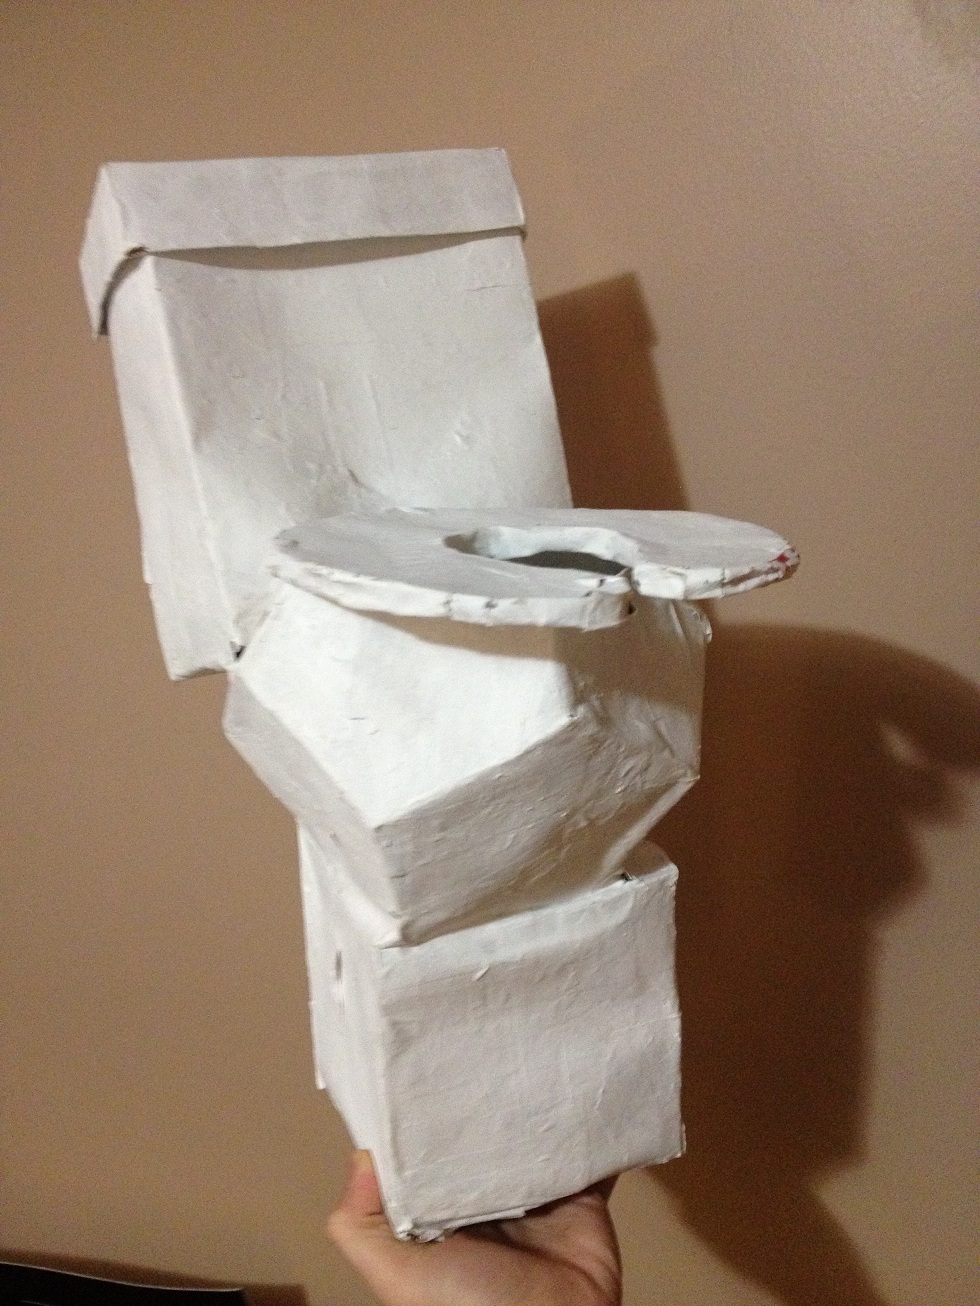 Toilet tissue dispenser made completely out of paper flour water and paint